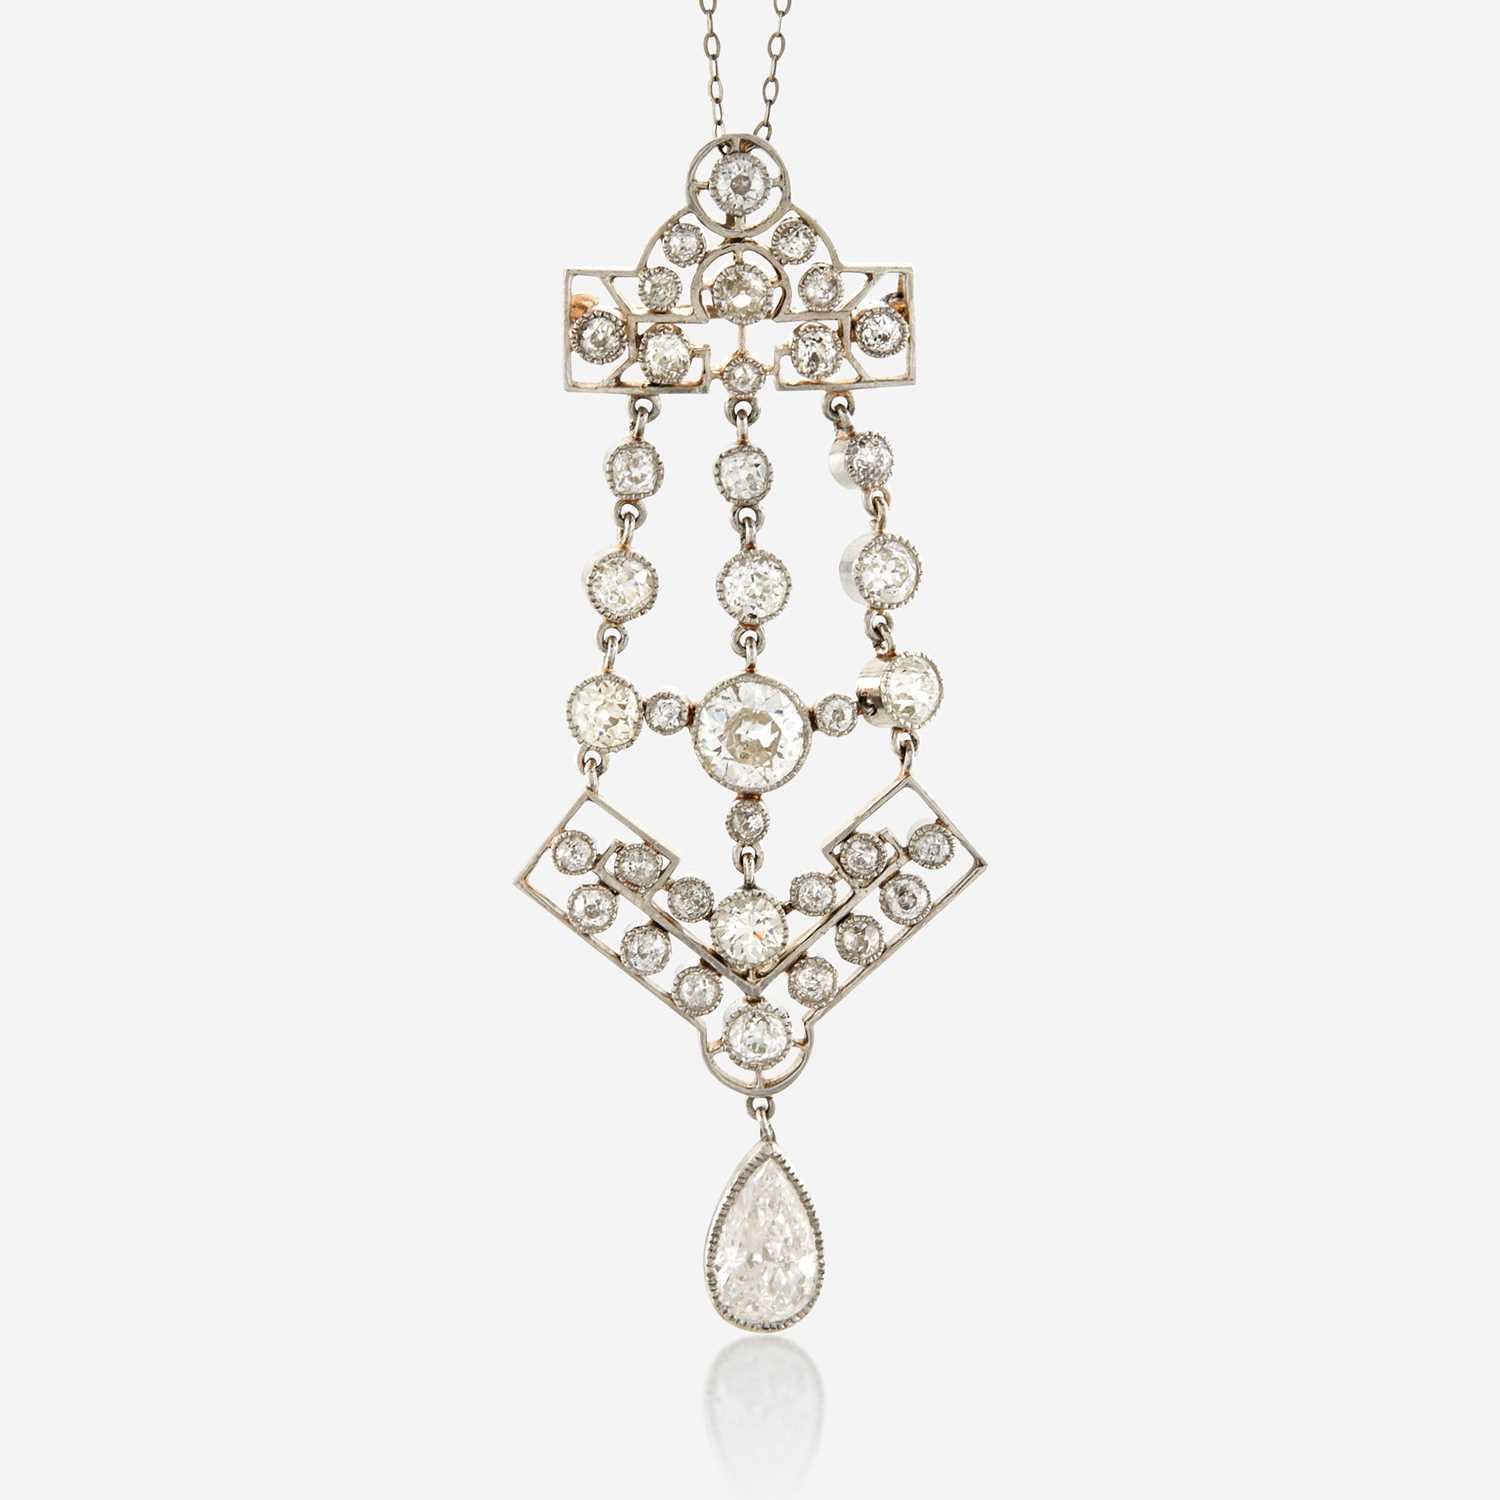 Lot 7 - A diamond and platinum topped gold pendant